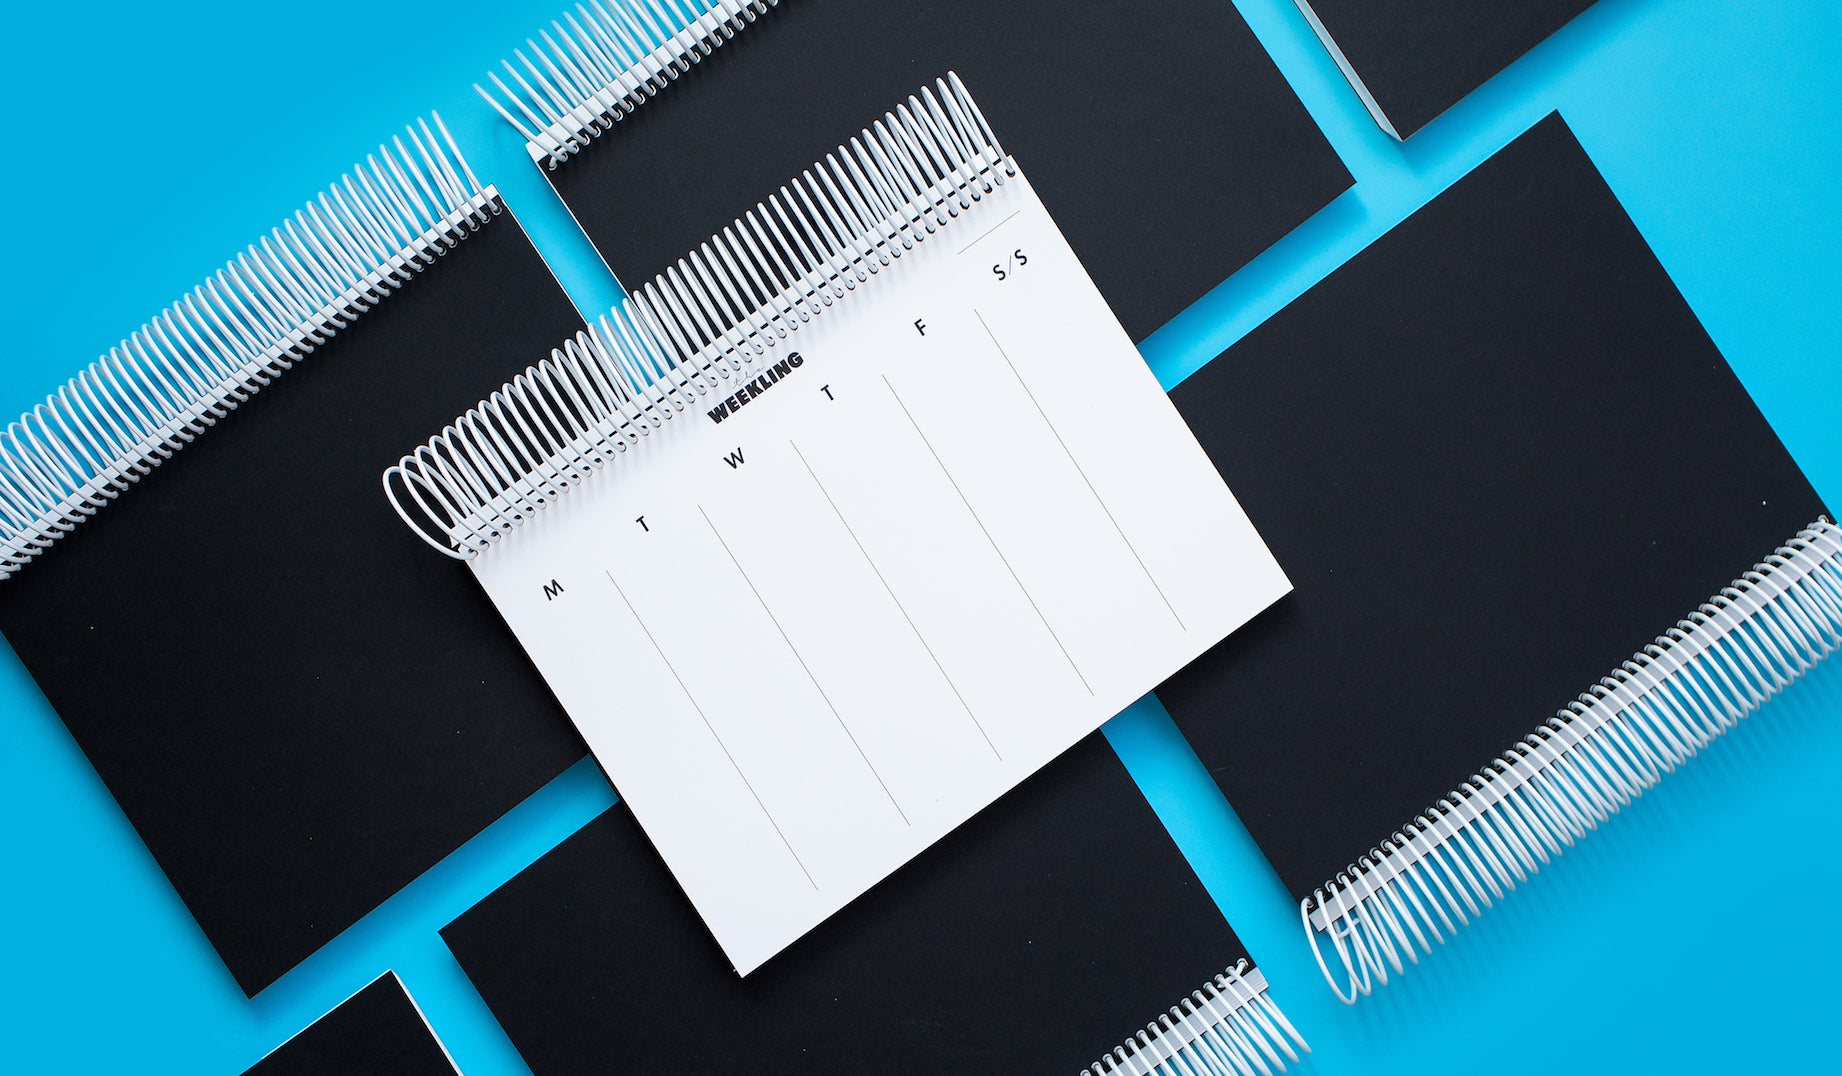 Perfect for custom calendars or day planners, our spiral binding allows your books to lie totally flat.